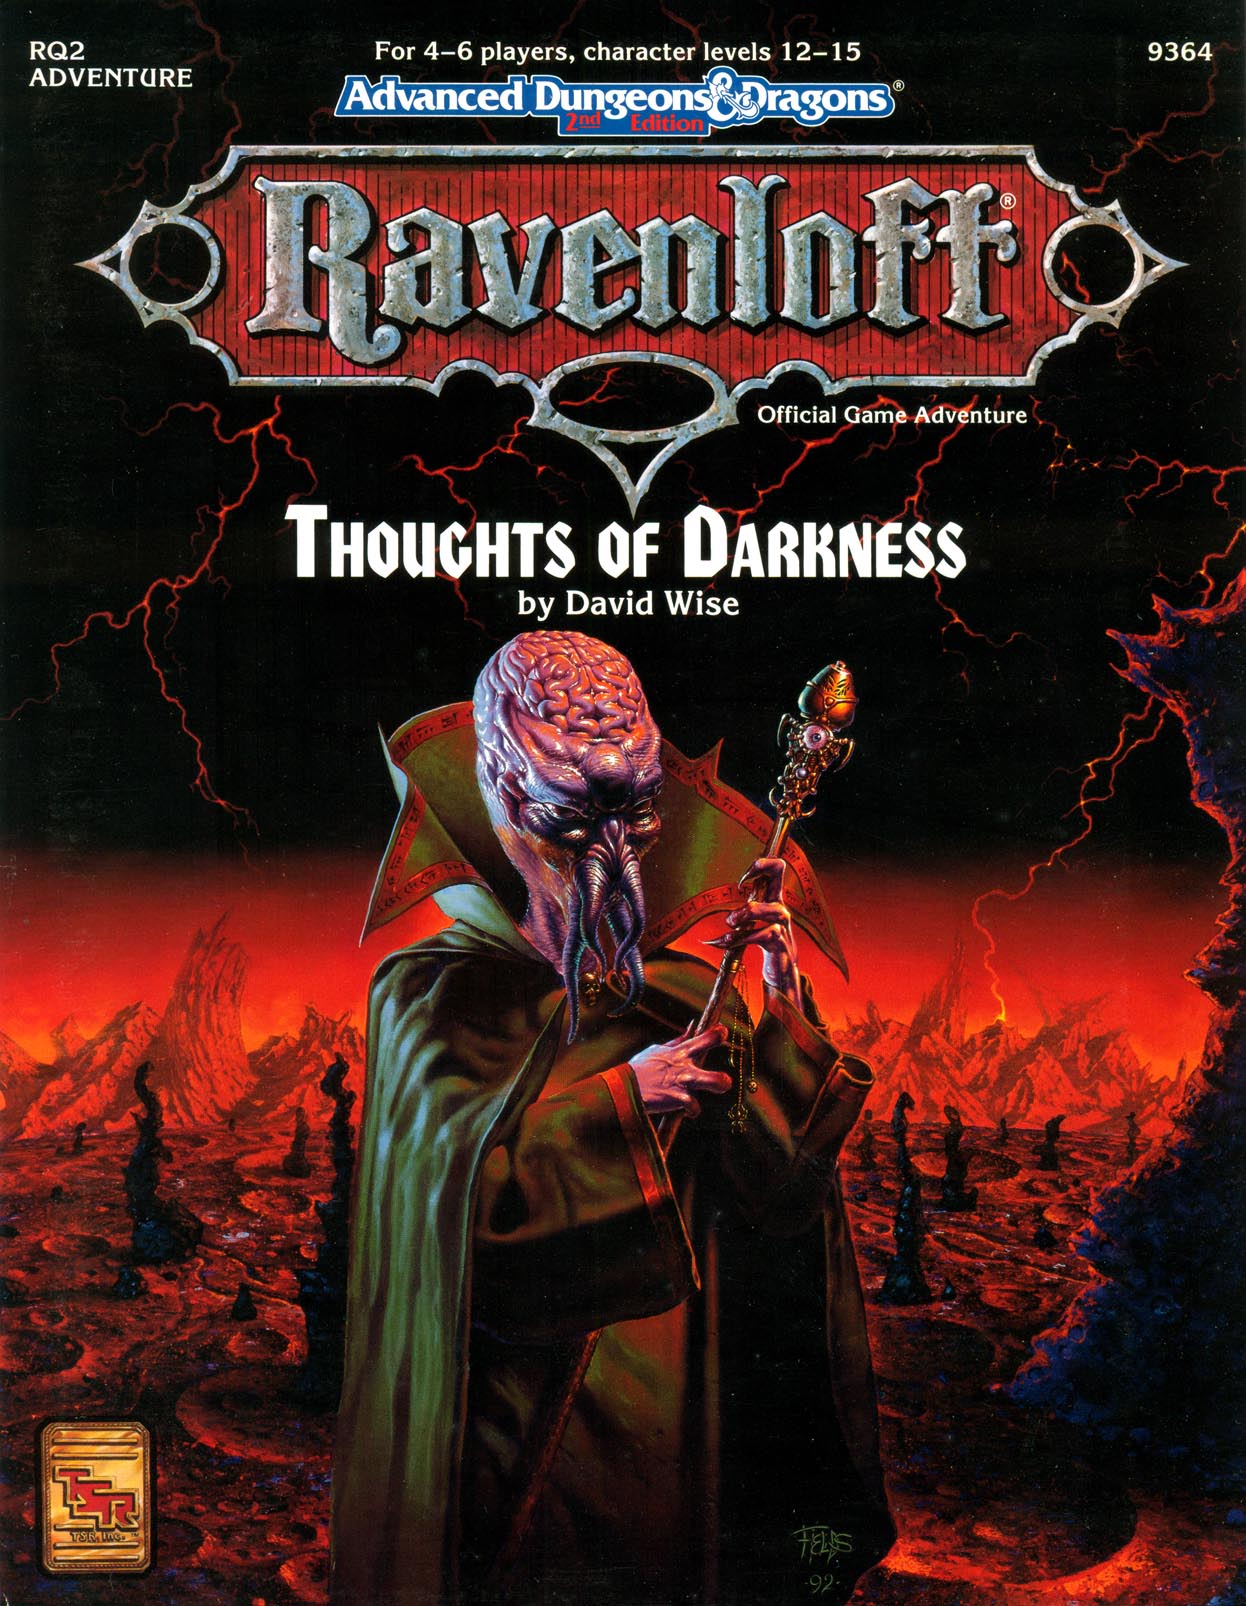 RQ2: Thoughts of DarknessCover art